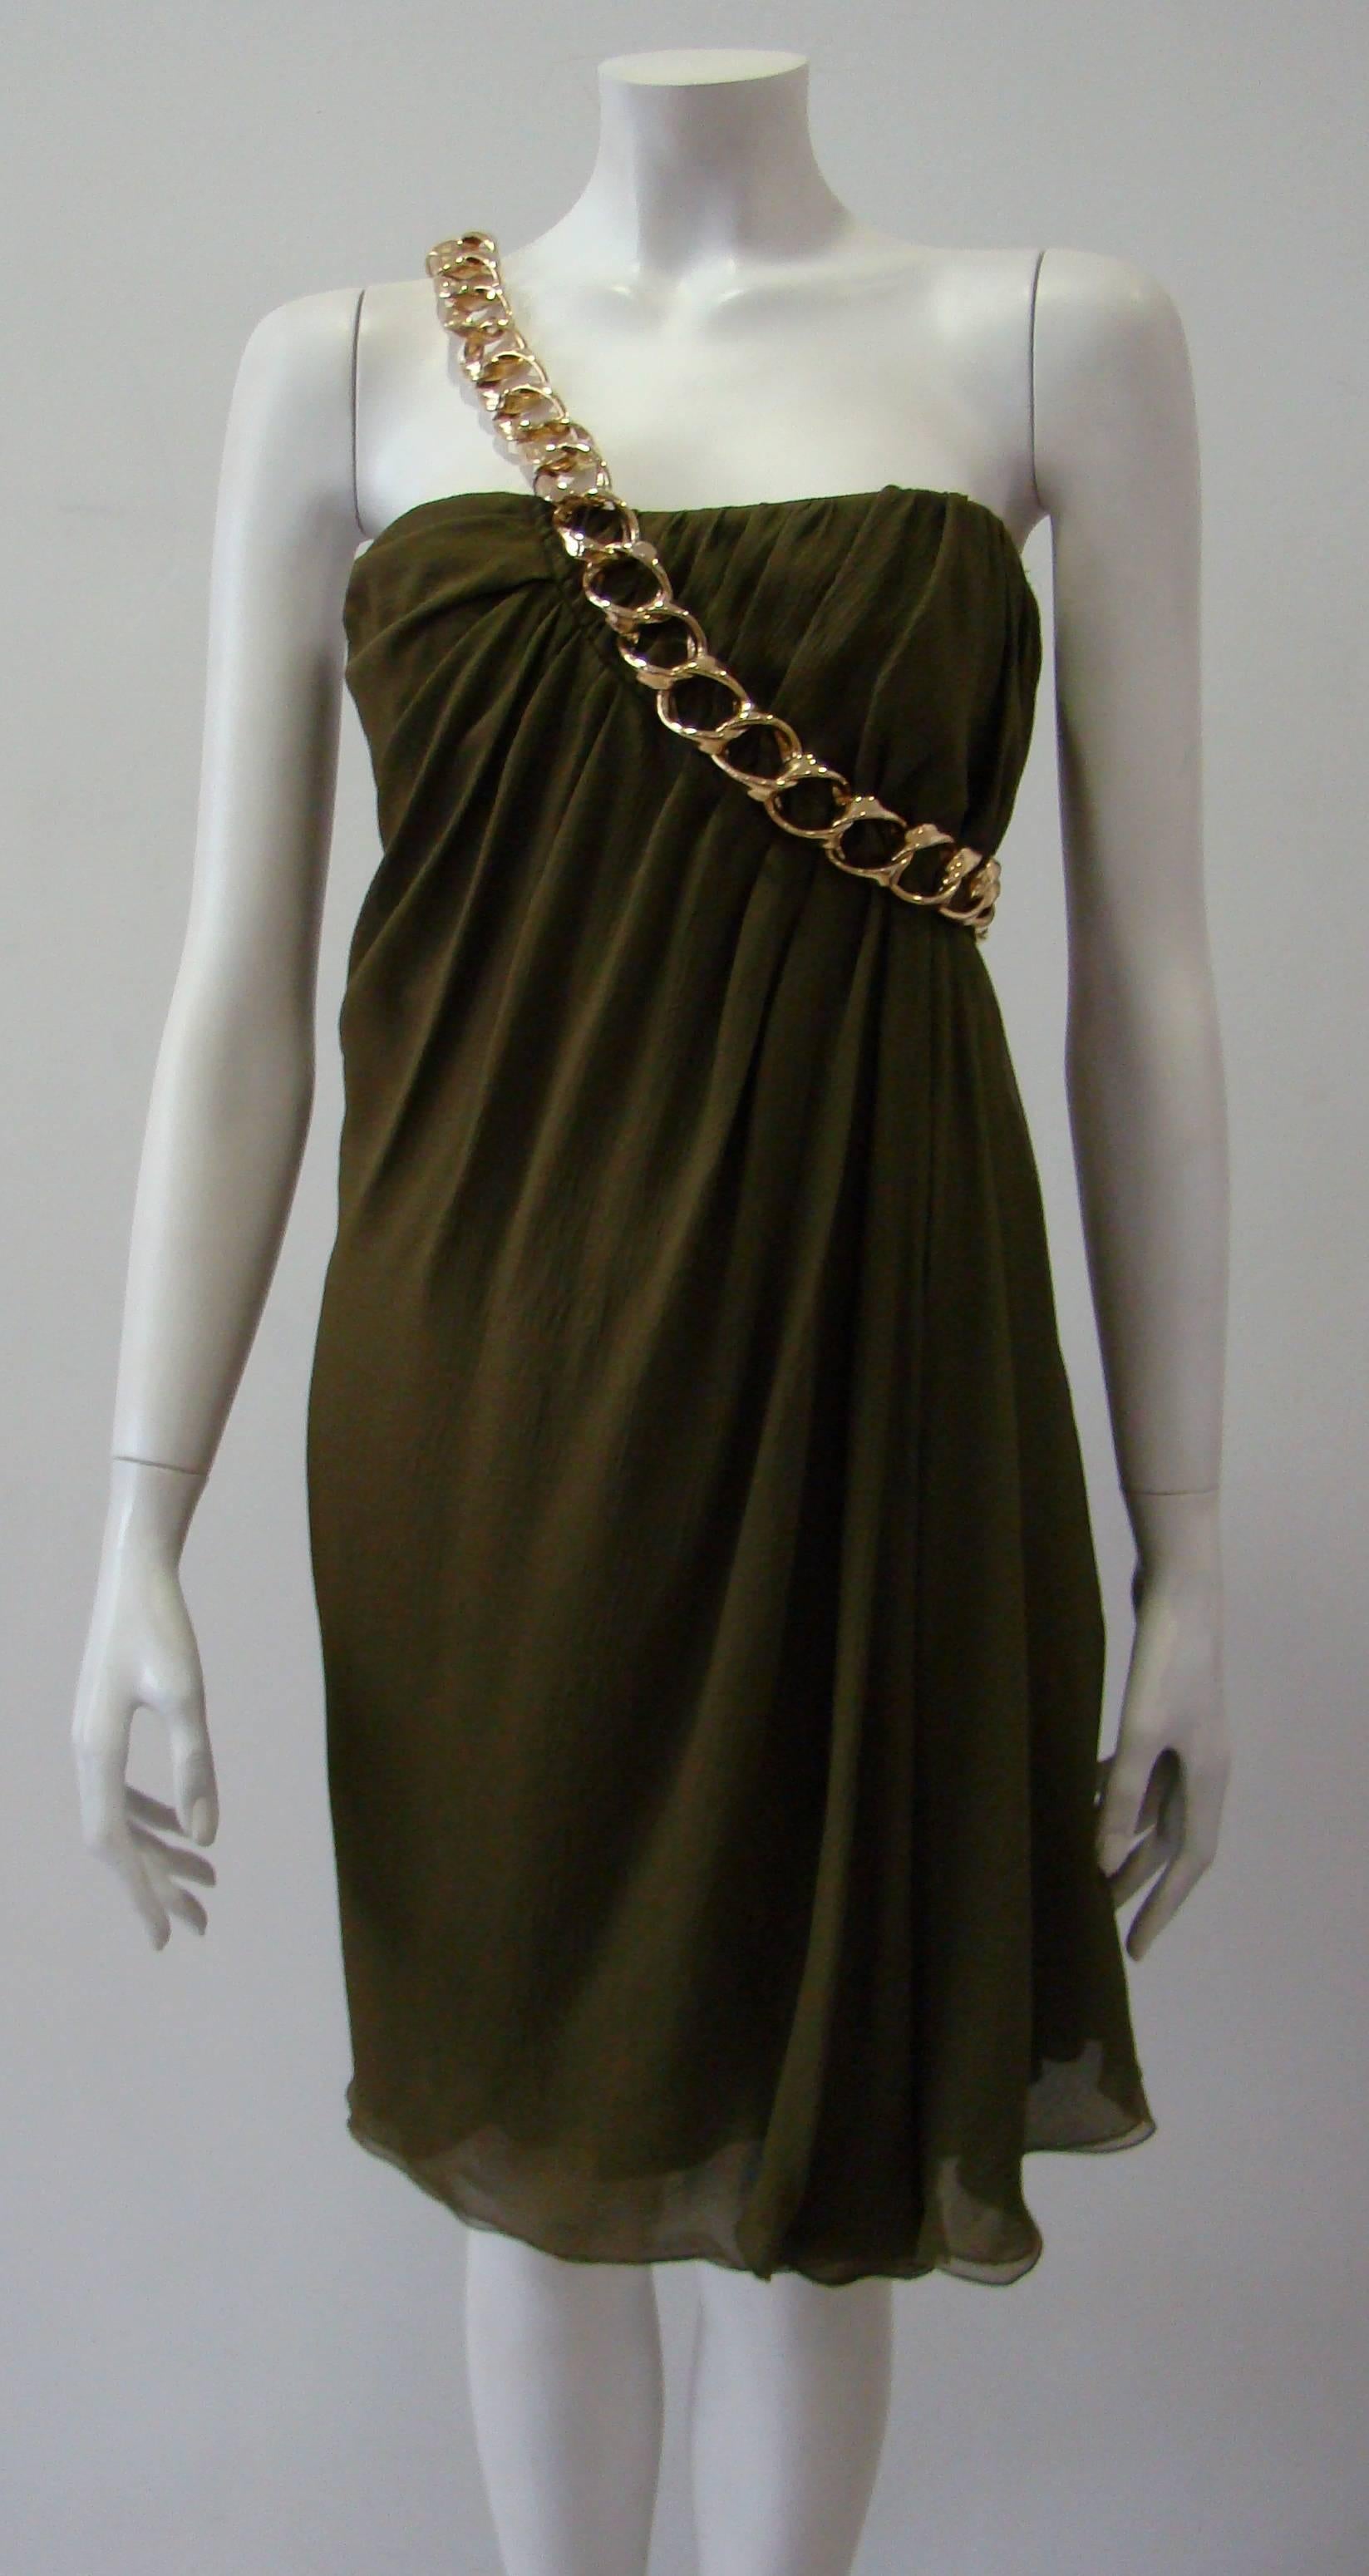 Pierre Balmain Cocktail Dress. An Olive Green Ruffle Dress, 100%Silk Featuring A Gold Chain Which Hugs One Arm. An Easy And Beatiful Choice For Evening Events.